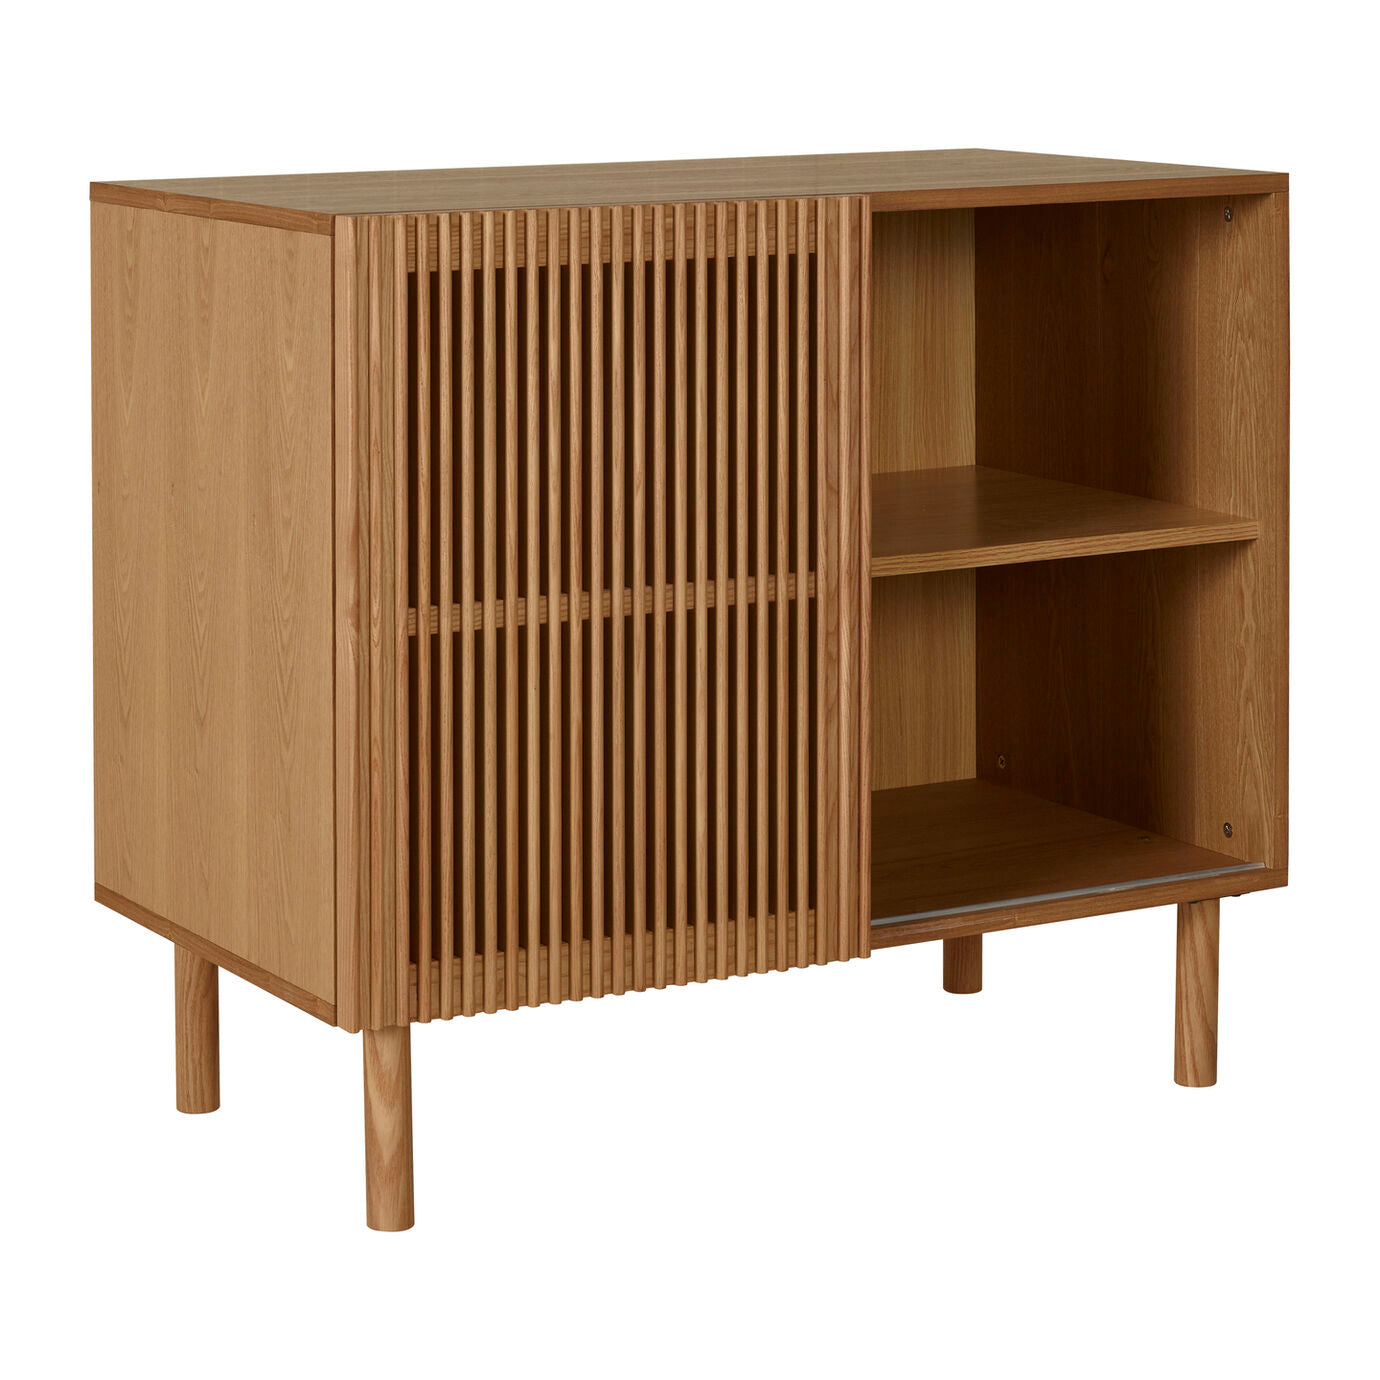 Deer Industries Home Furniture Singapore, Quax Singapore Hai No Ki Series, Wooden Cabinet with Sliding Door, Sliding slated door cabinet, Baby Changing Table, Kids storage, Home Storage Singapore